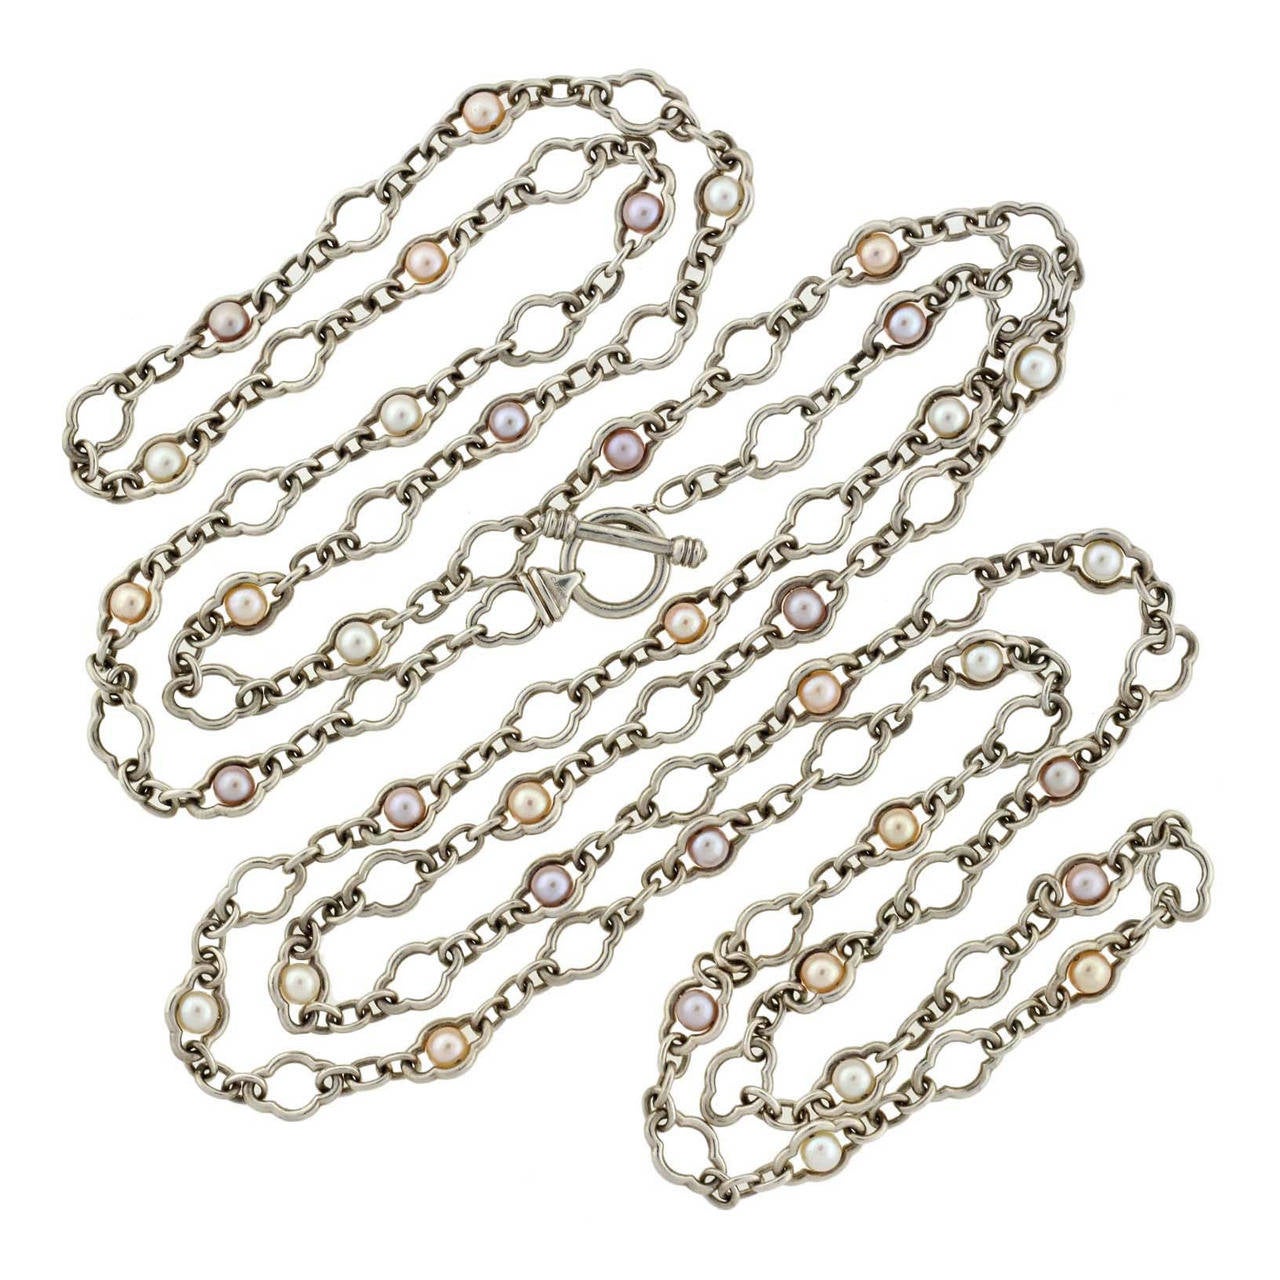 Charles Krypell Fresh Water 80 Inch Pearl Chain Necklace